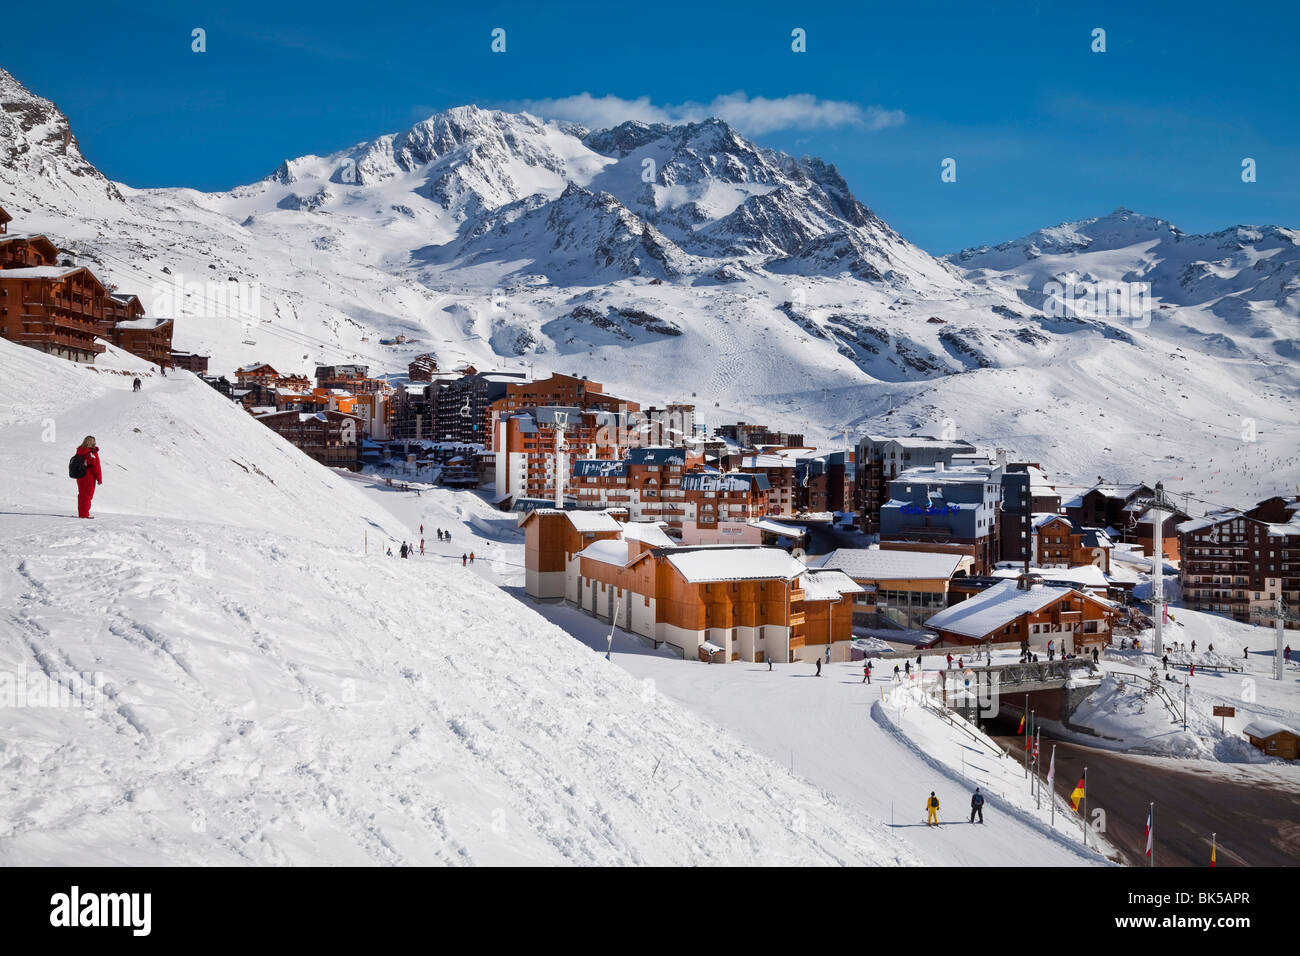 Val Thorens ski resort, 2300m, in the Three Valleys (Les Trois Vallees), Savoie, French Alps, France, Europe Stock Photo